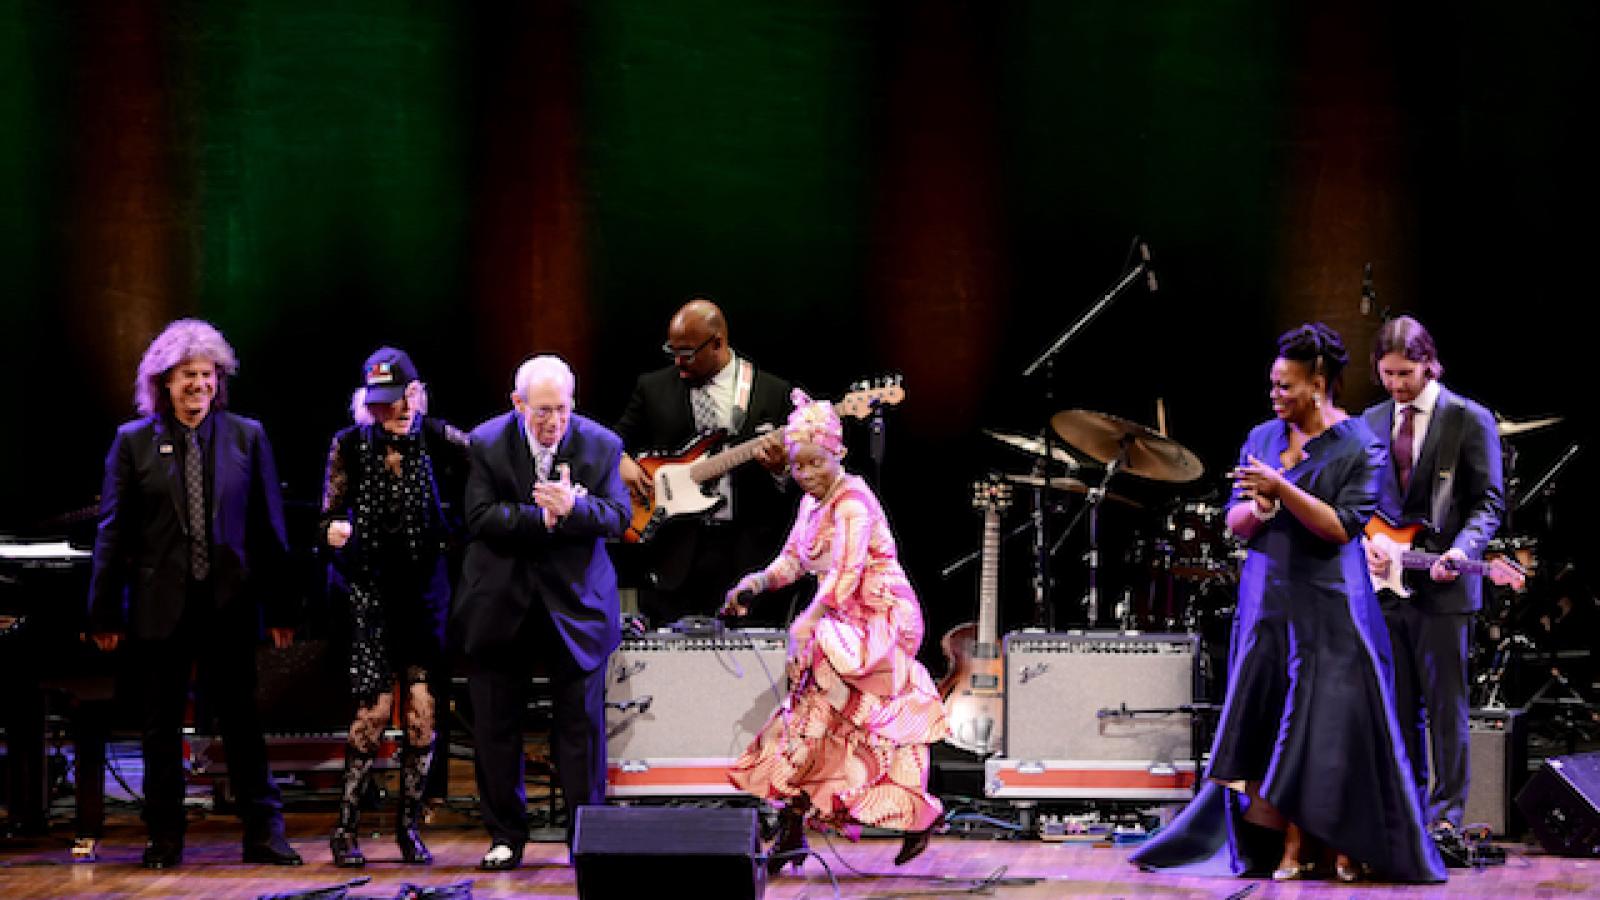 performers on stage at the 2018 NEA Jazz Masters Tribute Concert